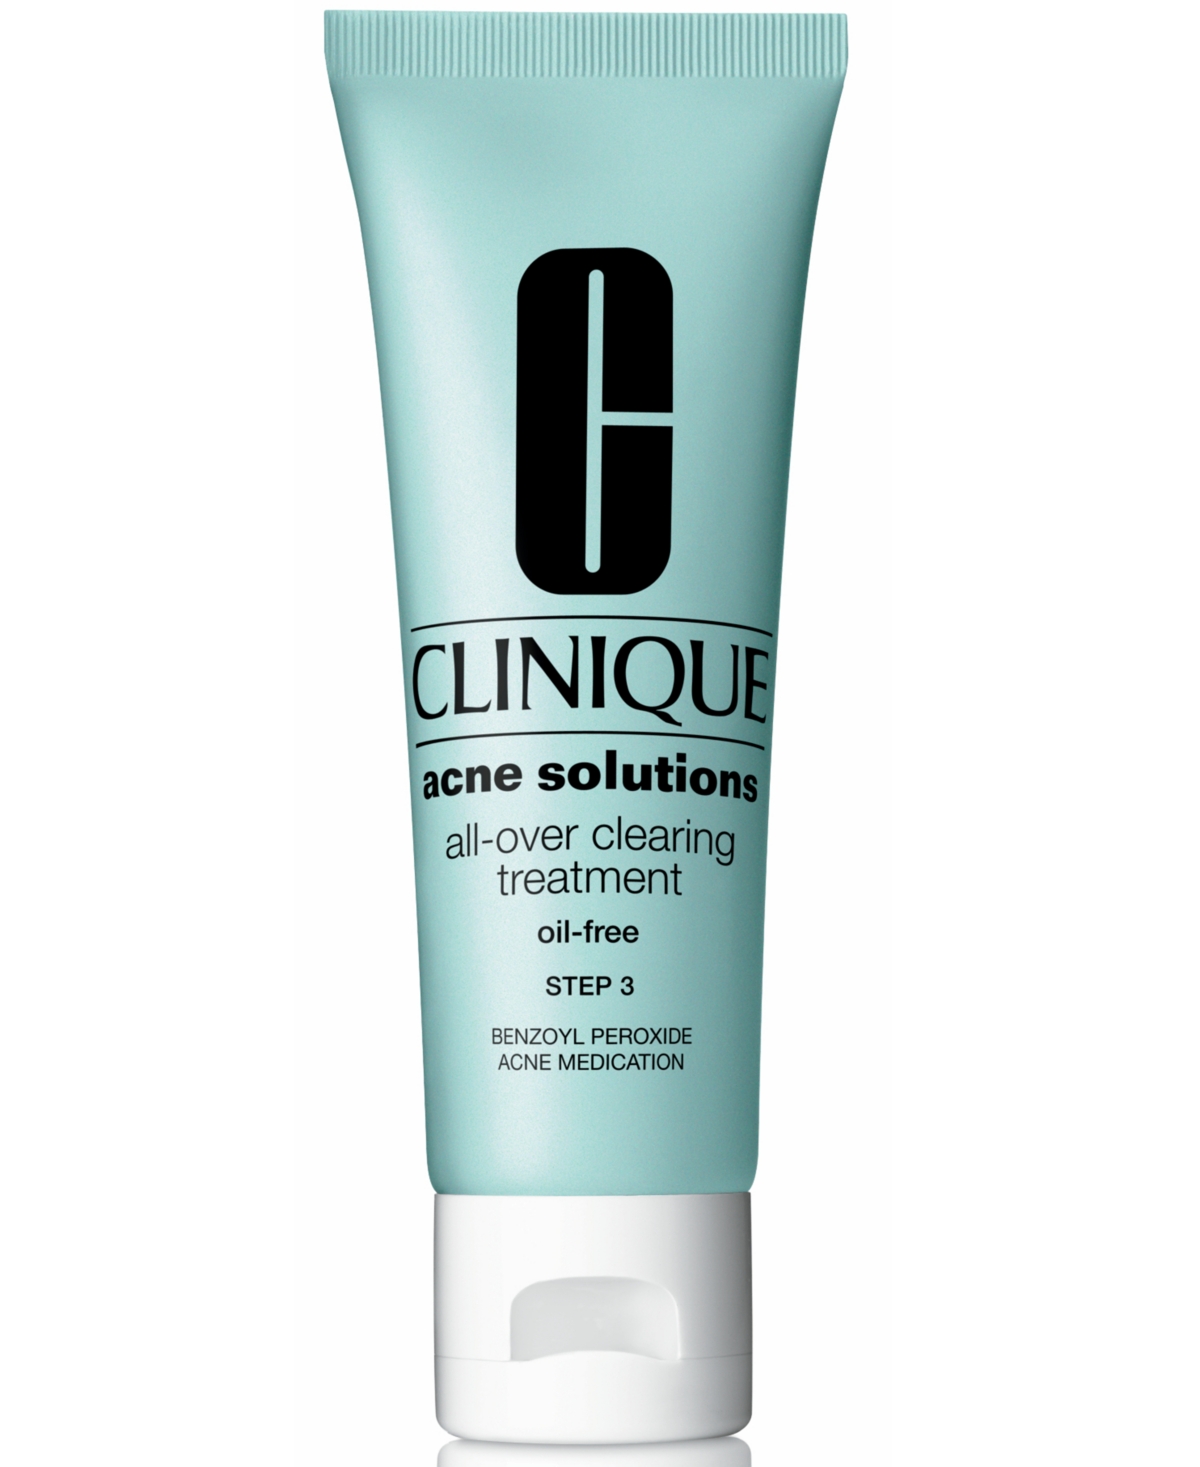 UPC 020714291839 product image for Clinique Acne Solutions All-Over Clearing Treatment, 1.7 fl oz | upcitemdb.com